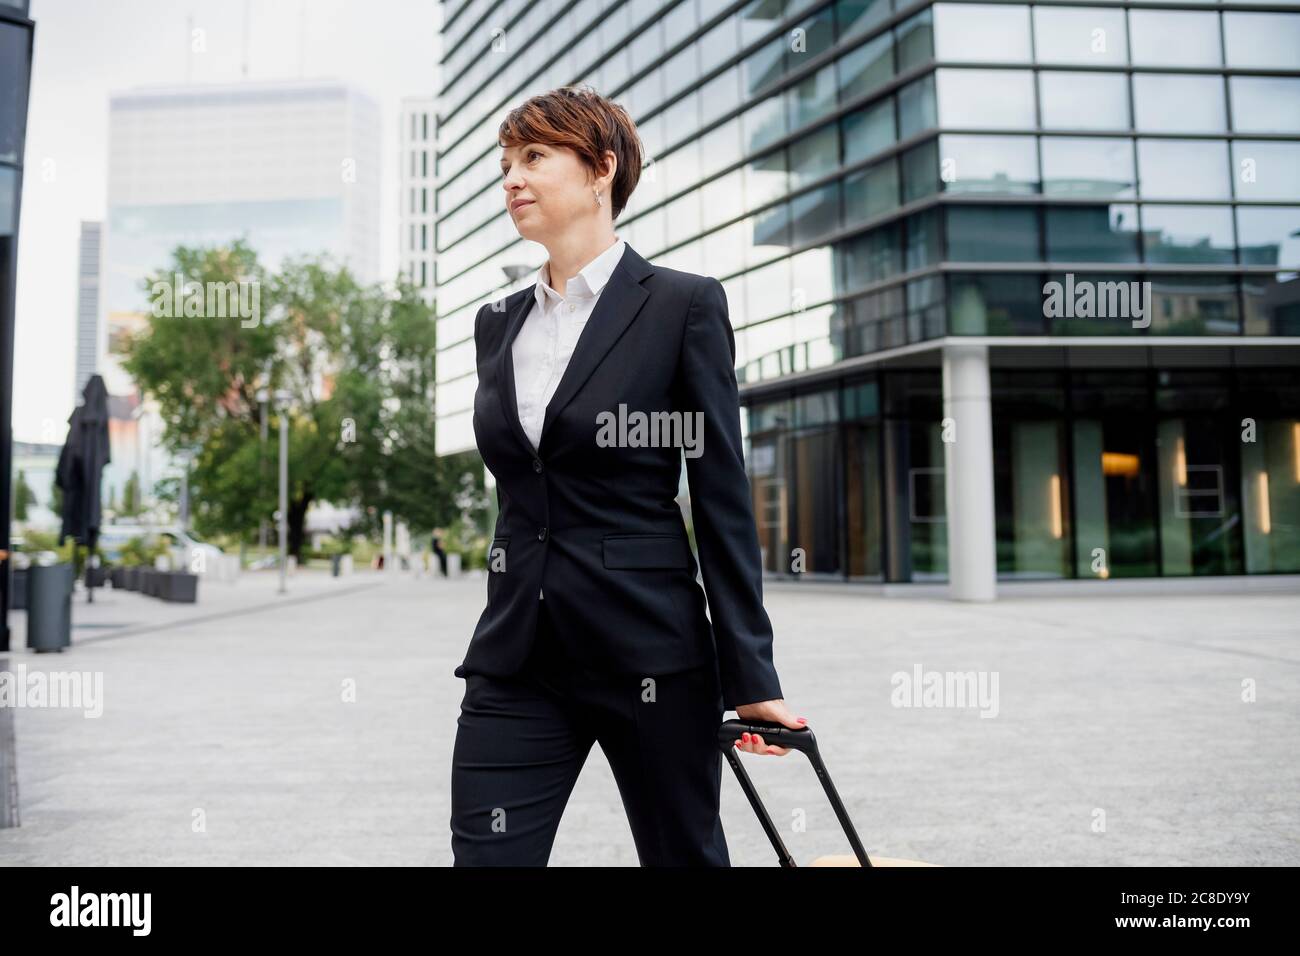 Female entrepreneur with suitcase walking on street against modern building in city Stock Photo